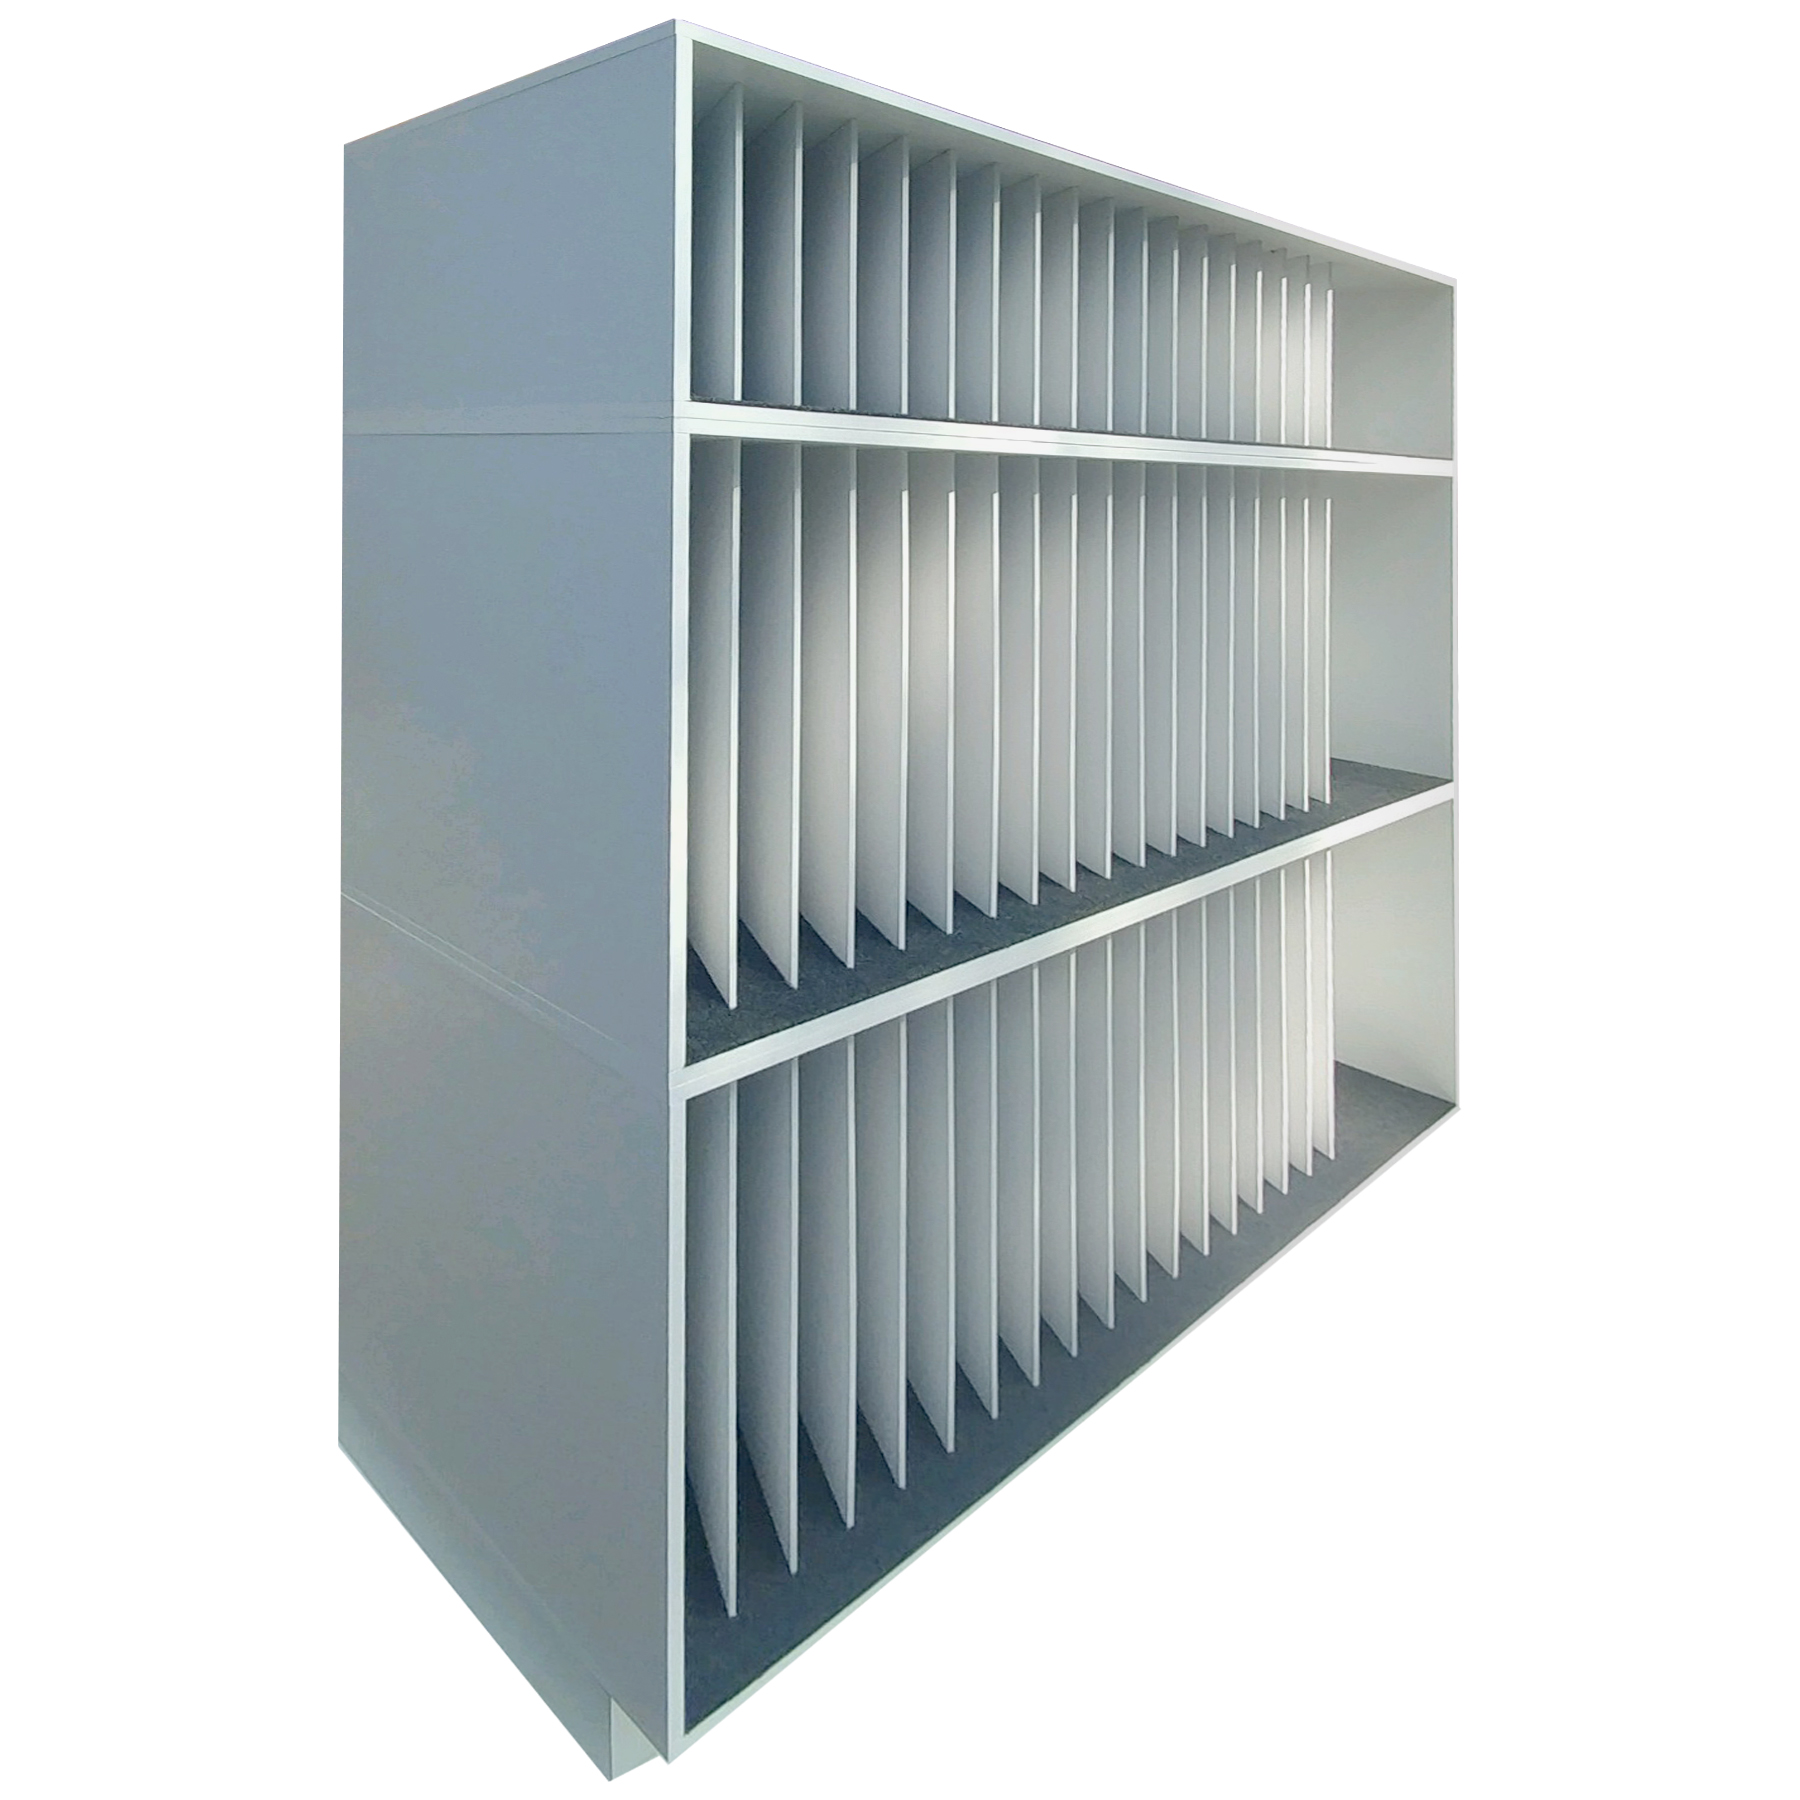 Vertical McHandy Rack Tower Upright Sample Storage Display White Finish Carpeted Shelf